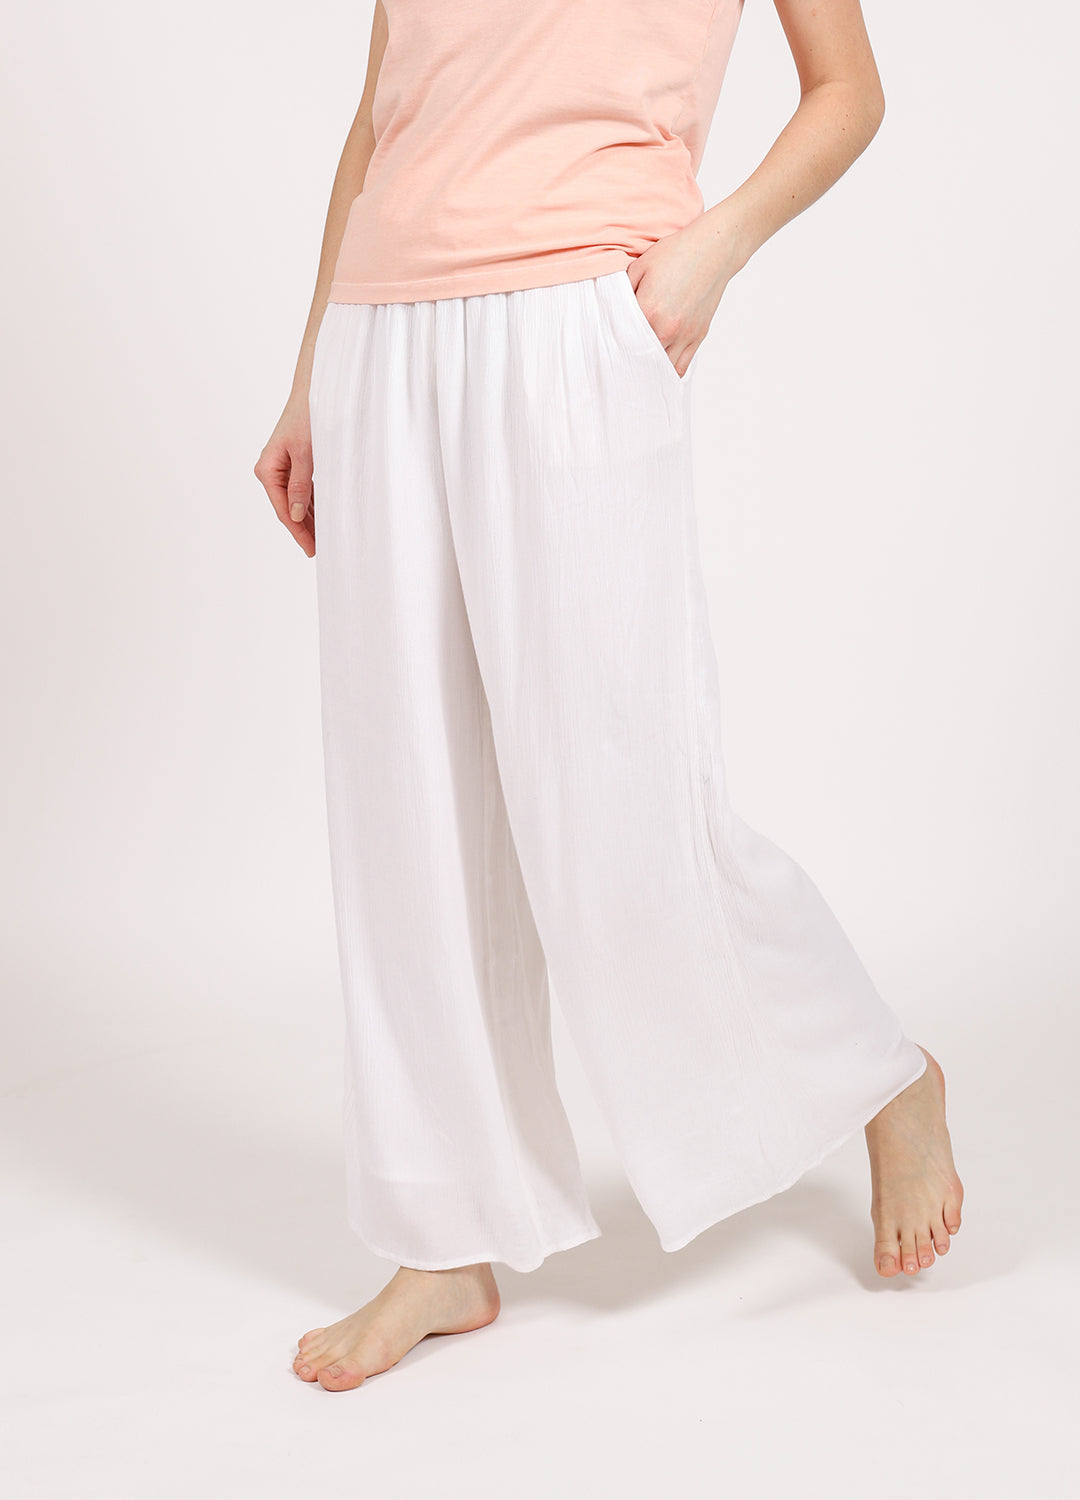 Koy Resort Miami Pant classic wide leg pant in soft crinkle rayon with an easy elastic ruched waistband in white at Inner Beach Co, Toronto, Canada